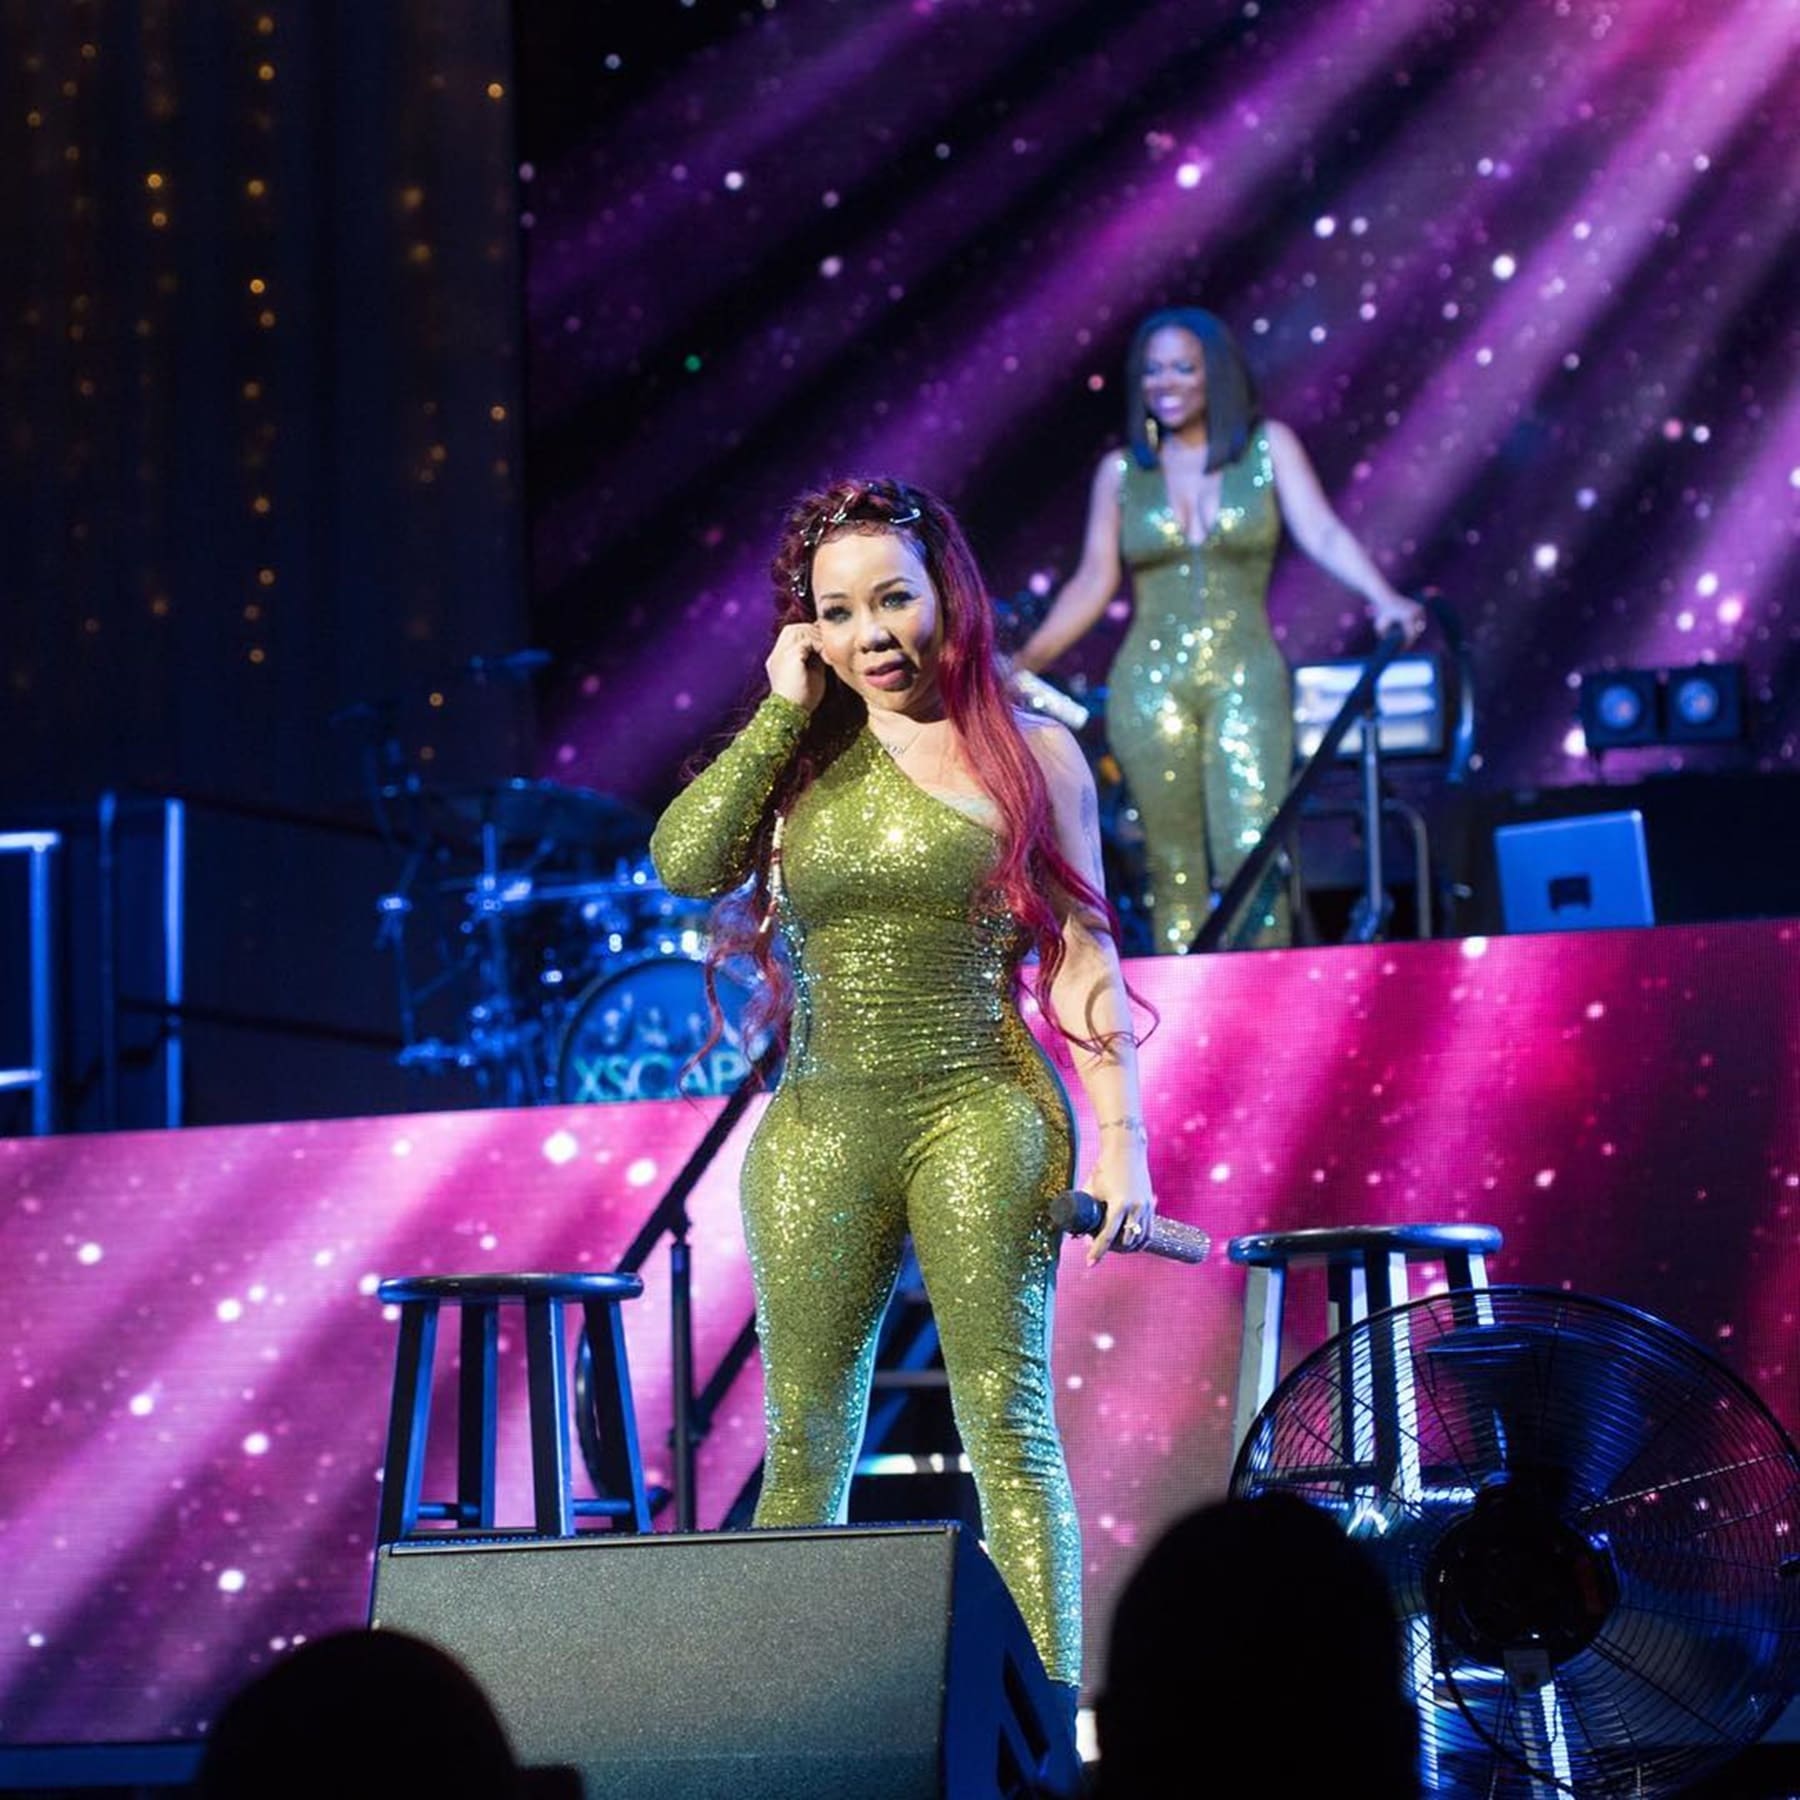 Tiny Harris Offers Her Gratitude To Everyone Who Came To Her Recent Performance - Check Her Out On Stage